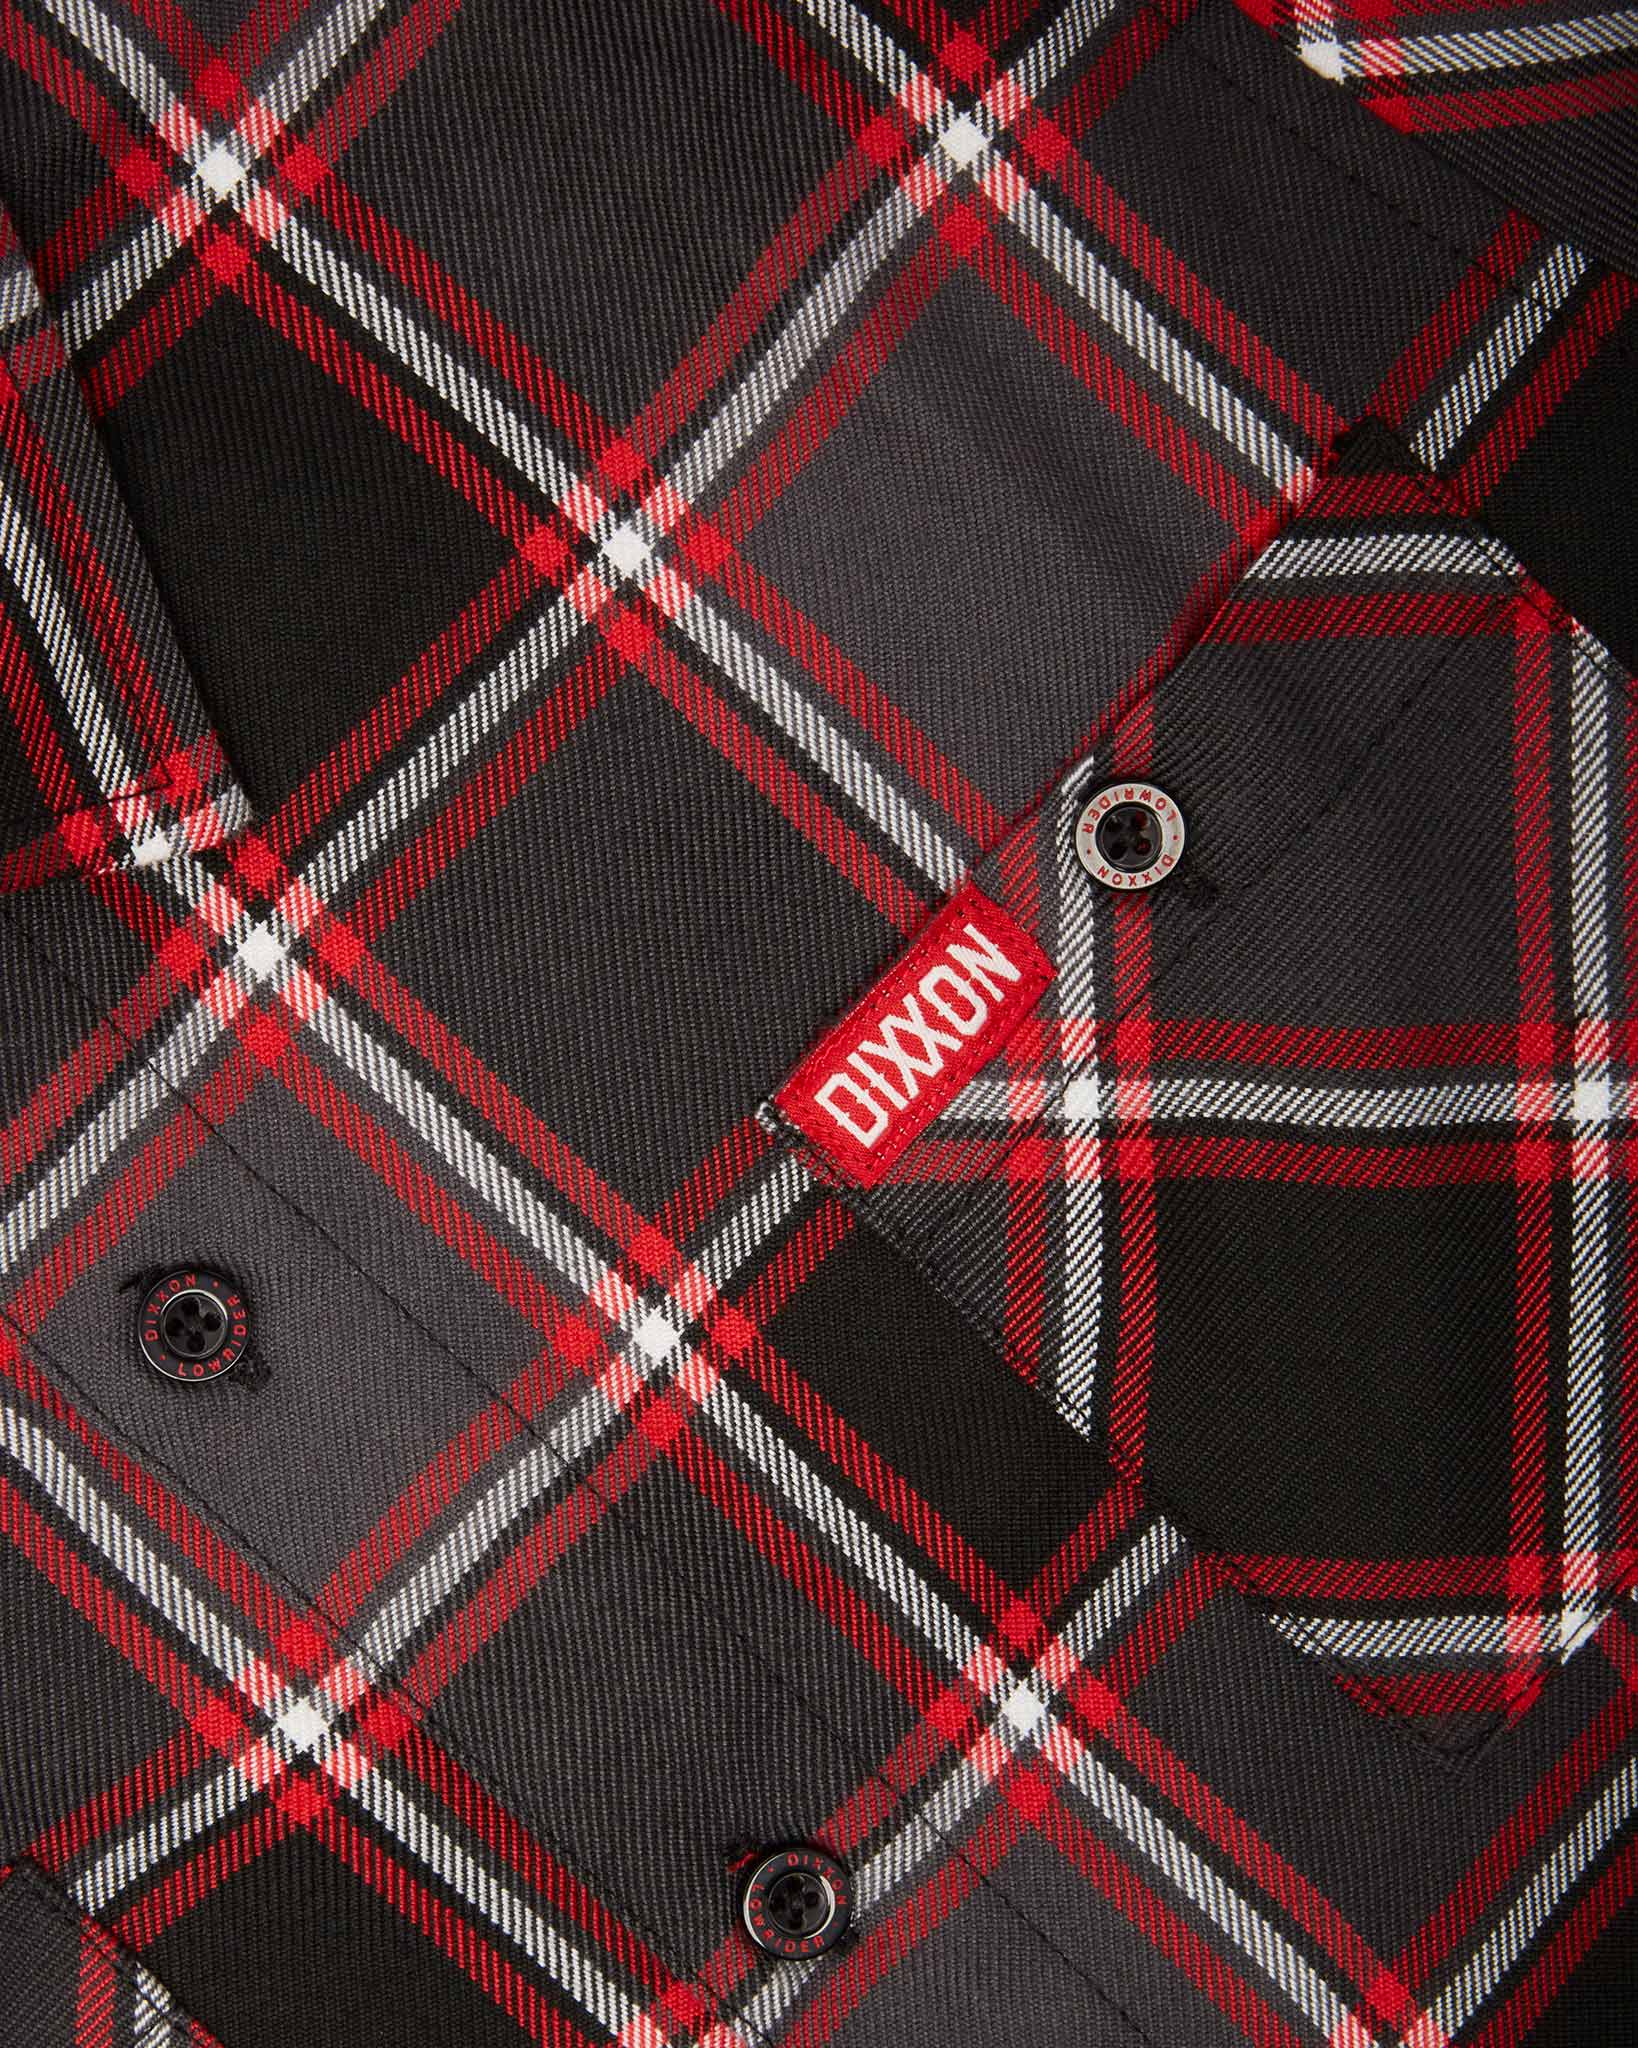 Youth Lowrider Flannel - Dixxon Flannel Co.